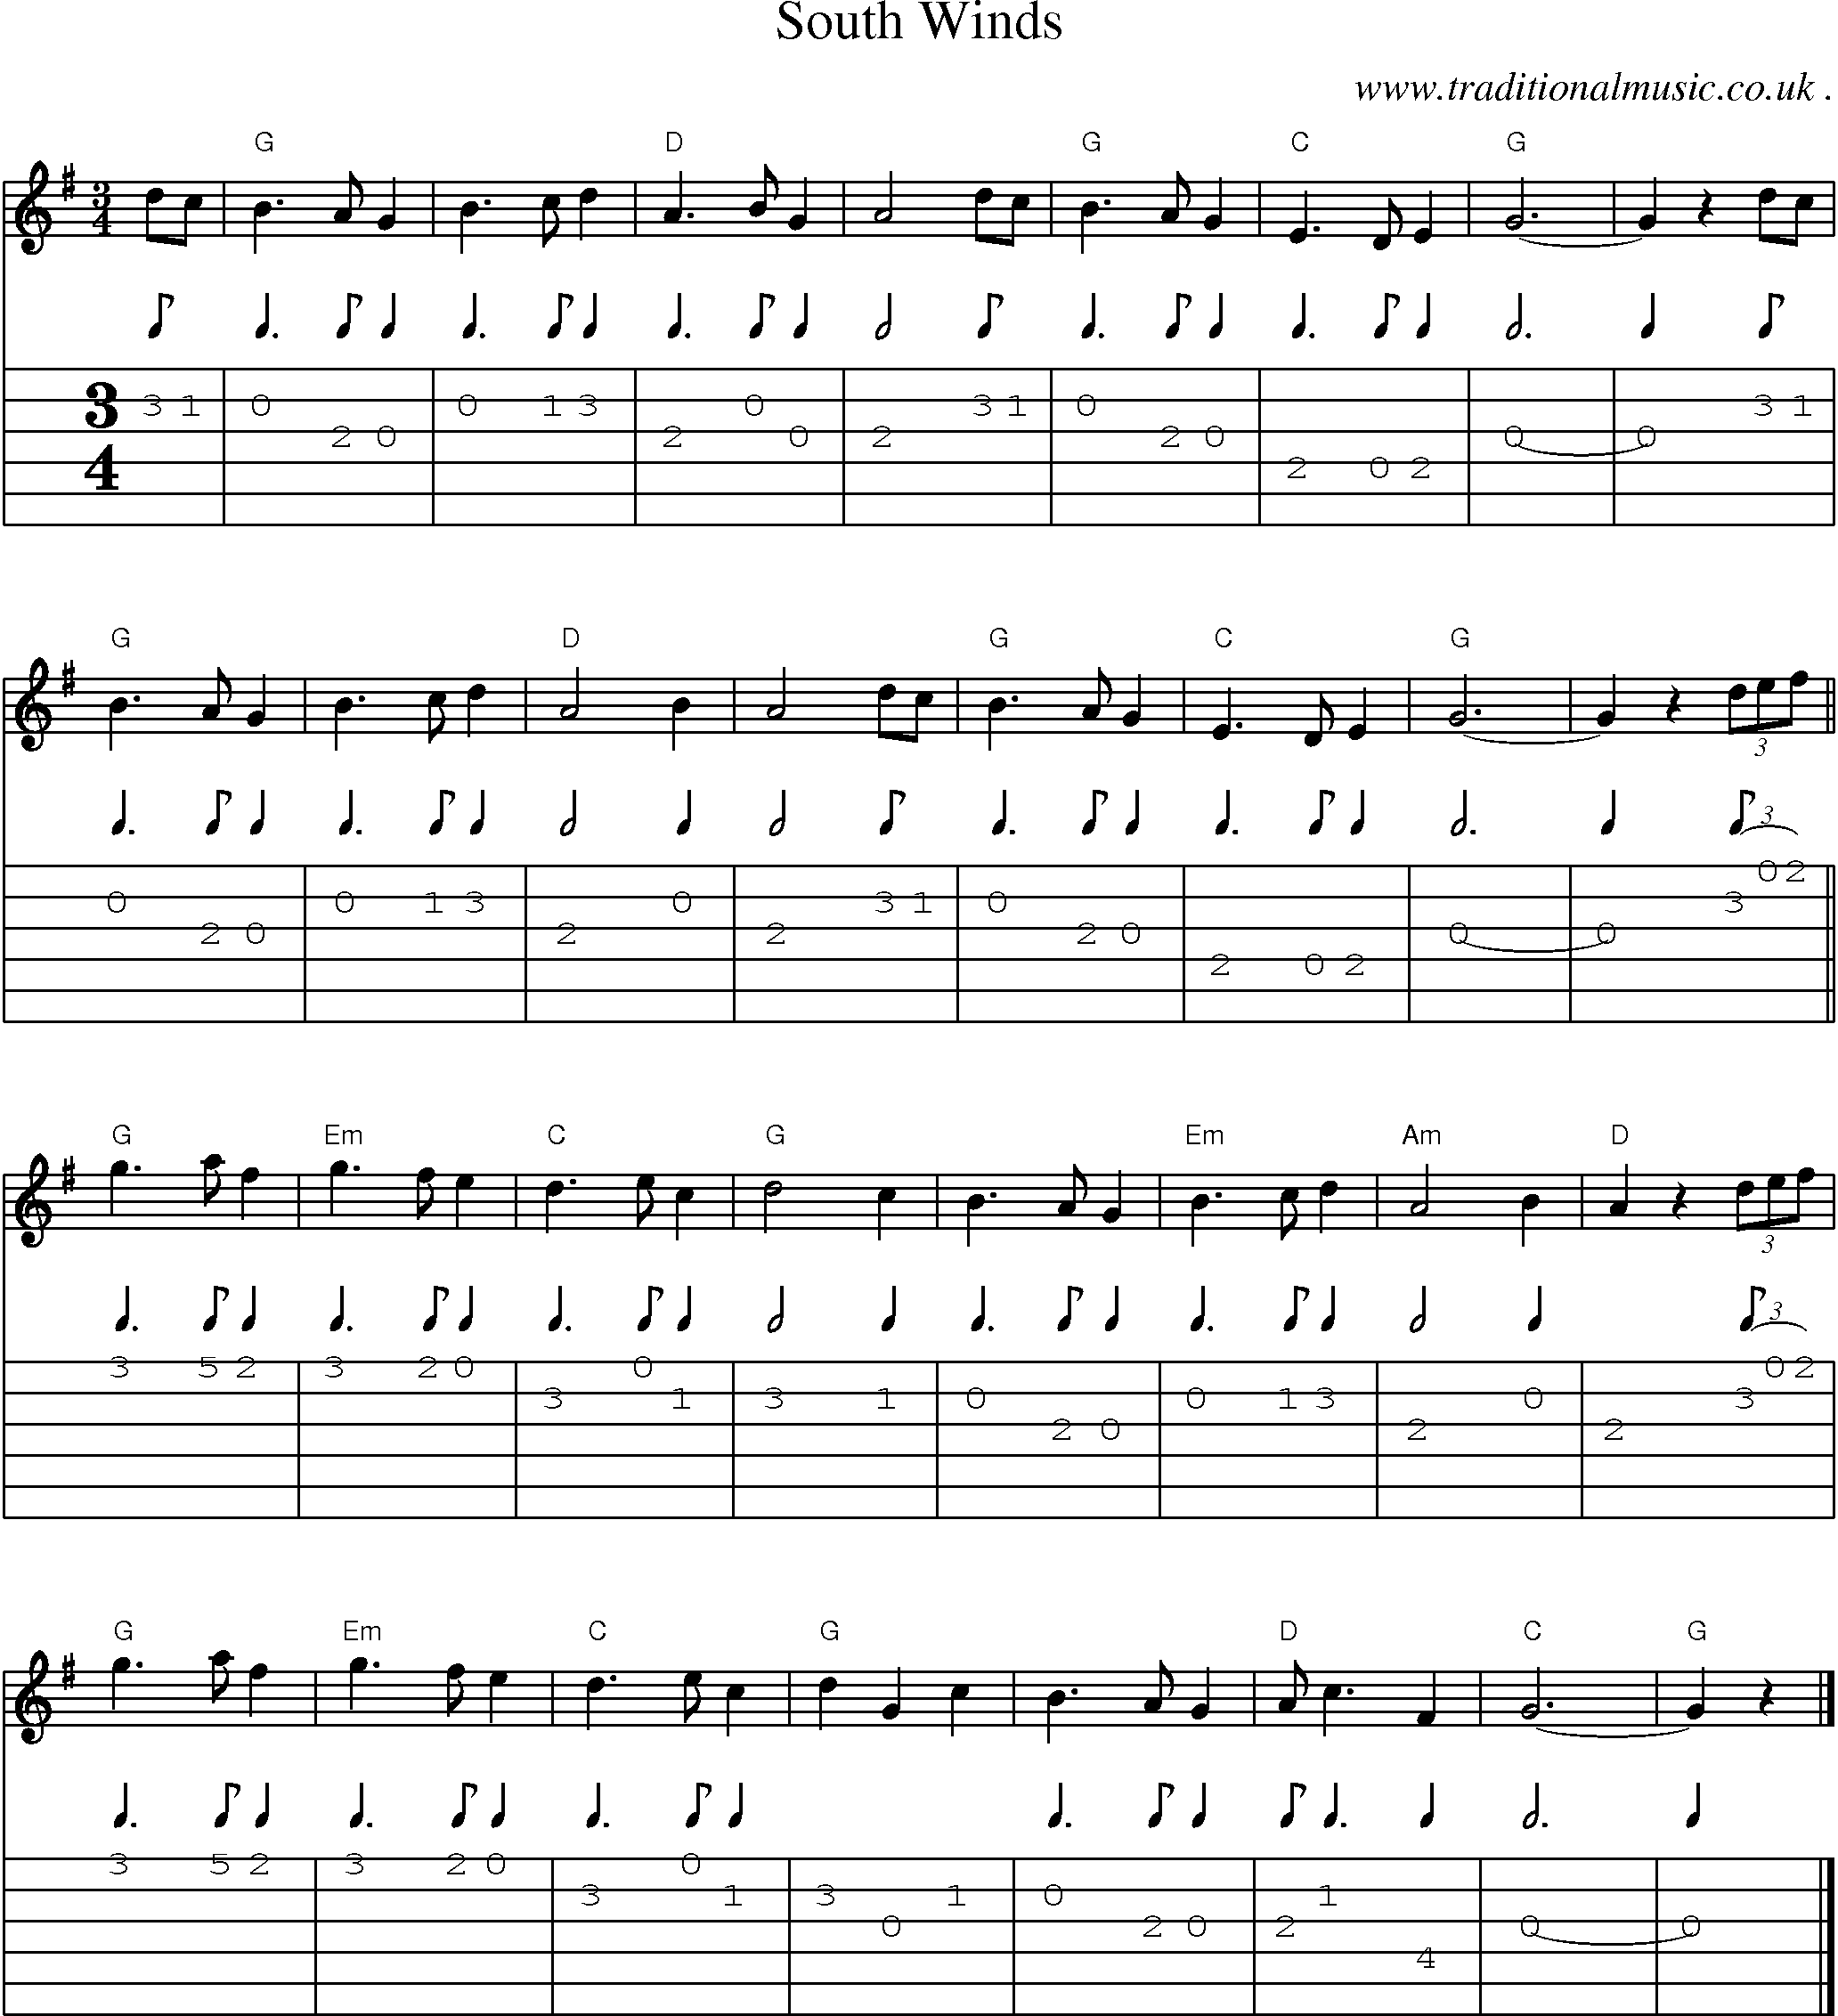 Music Score and Guitar Tabs for South Winds